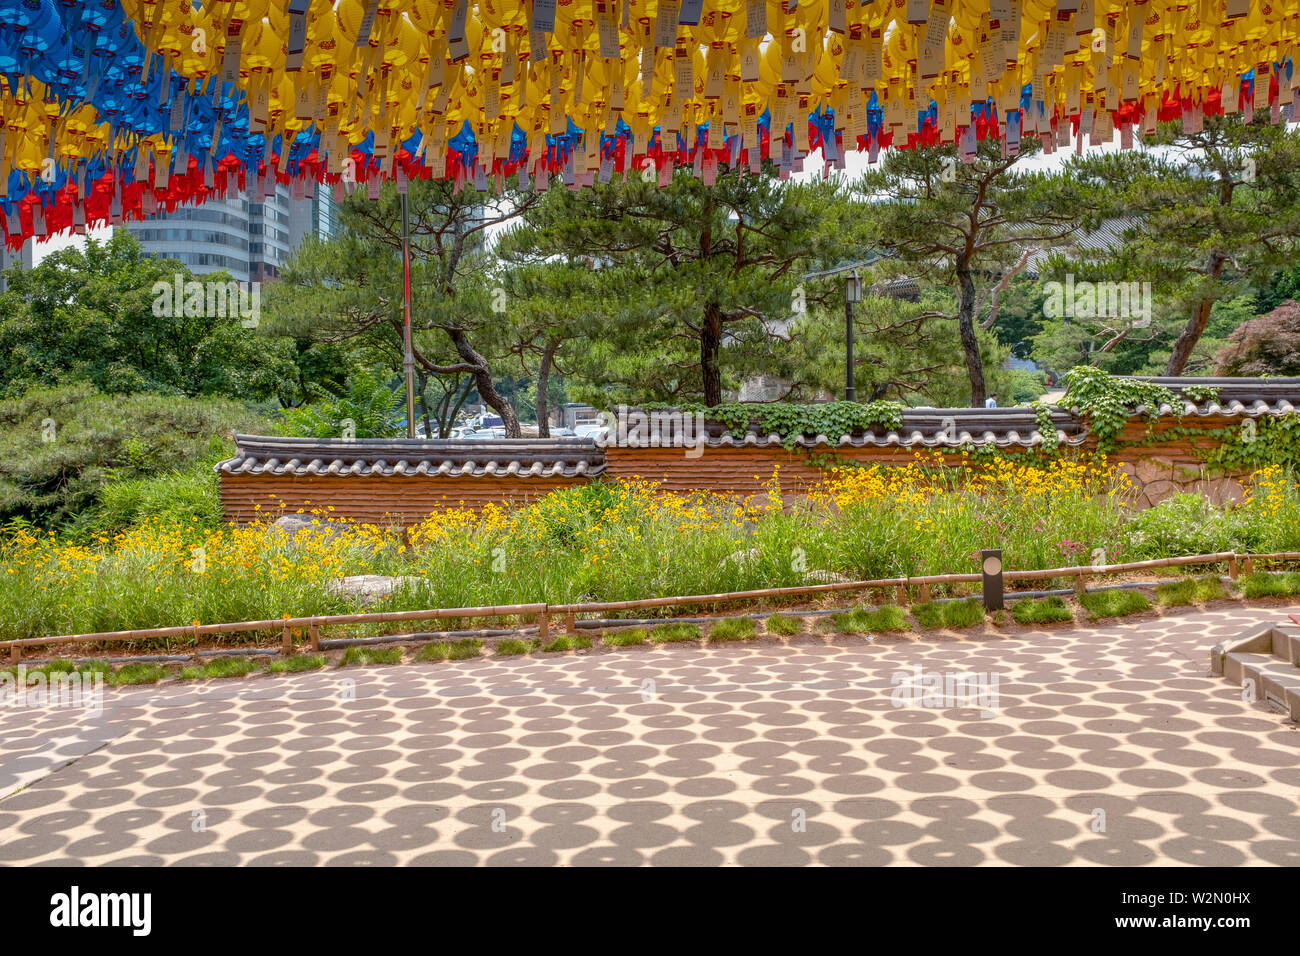 Colorful lanterns and picturesque pine trees during day time at the Bongeunsa buddhist temple, Seoul, South Korea Stock Photo